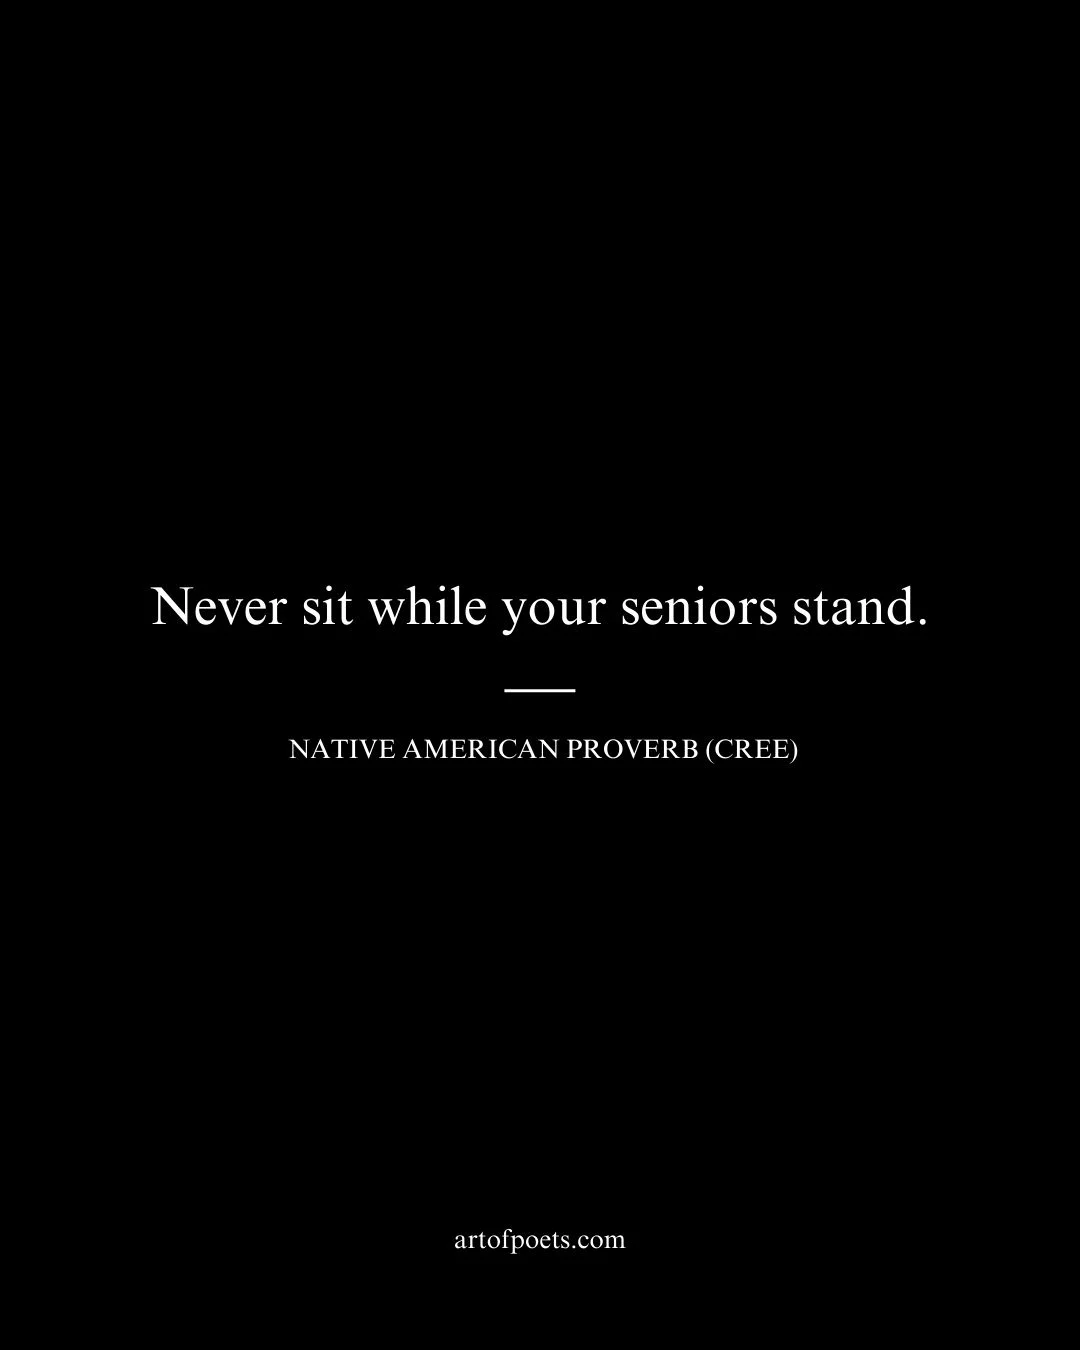 Never sit while your seniors stand